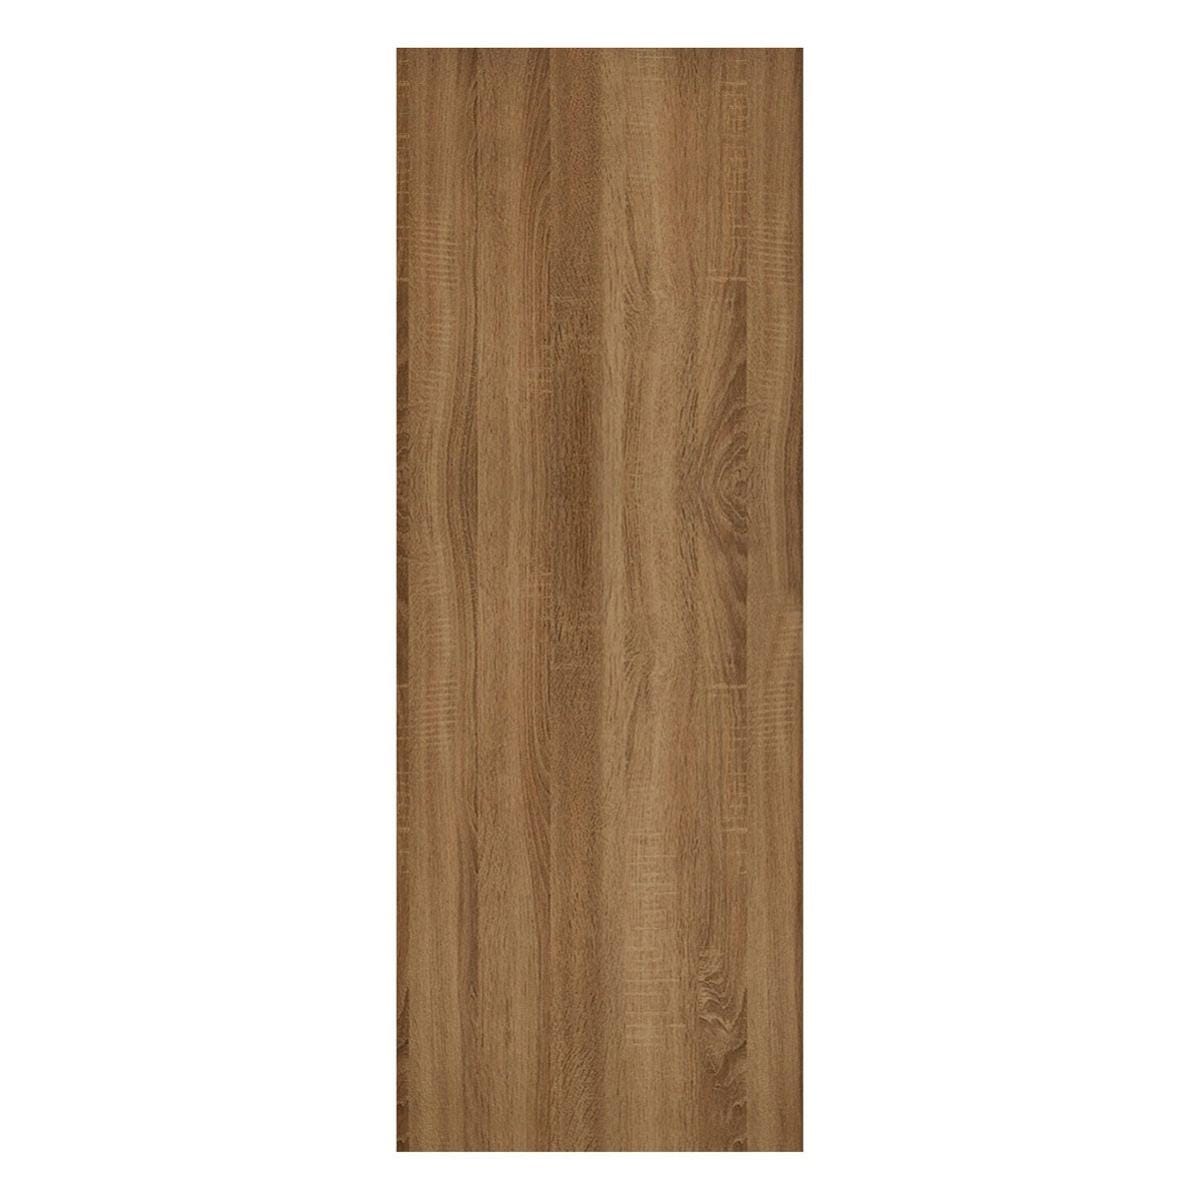 Tappeto bamboo noce